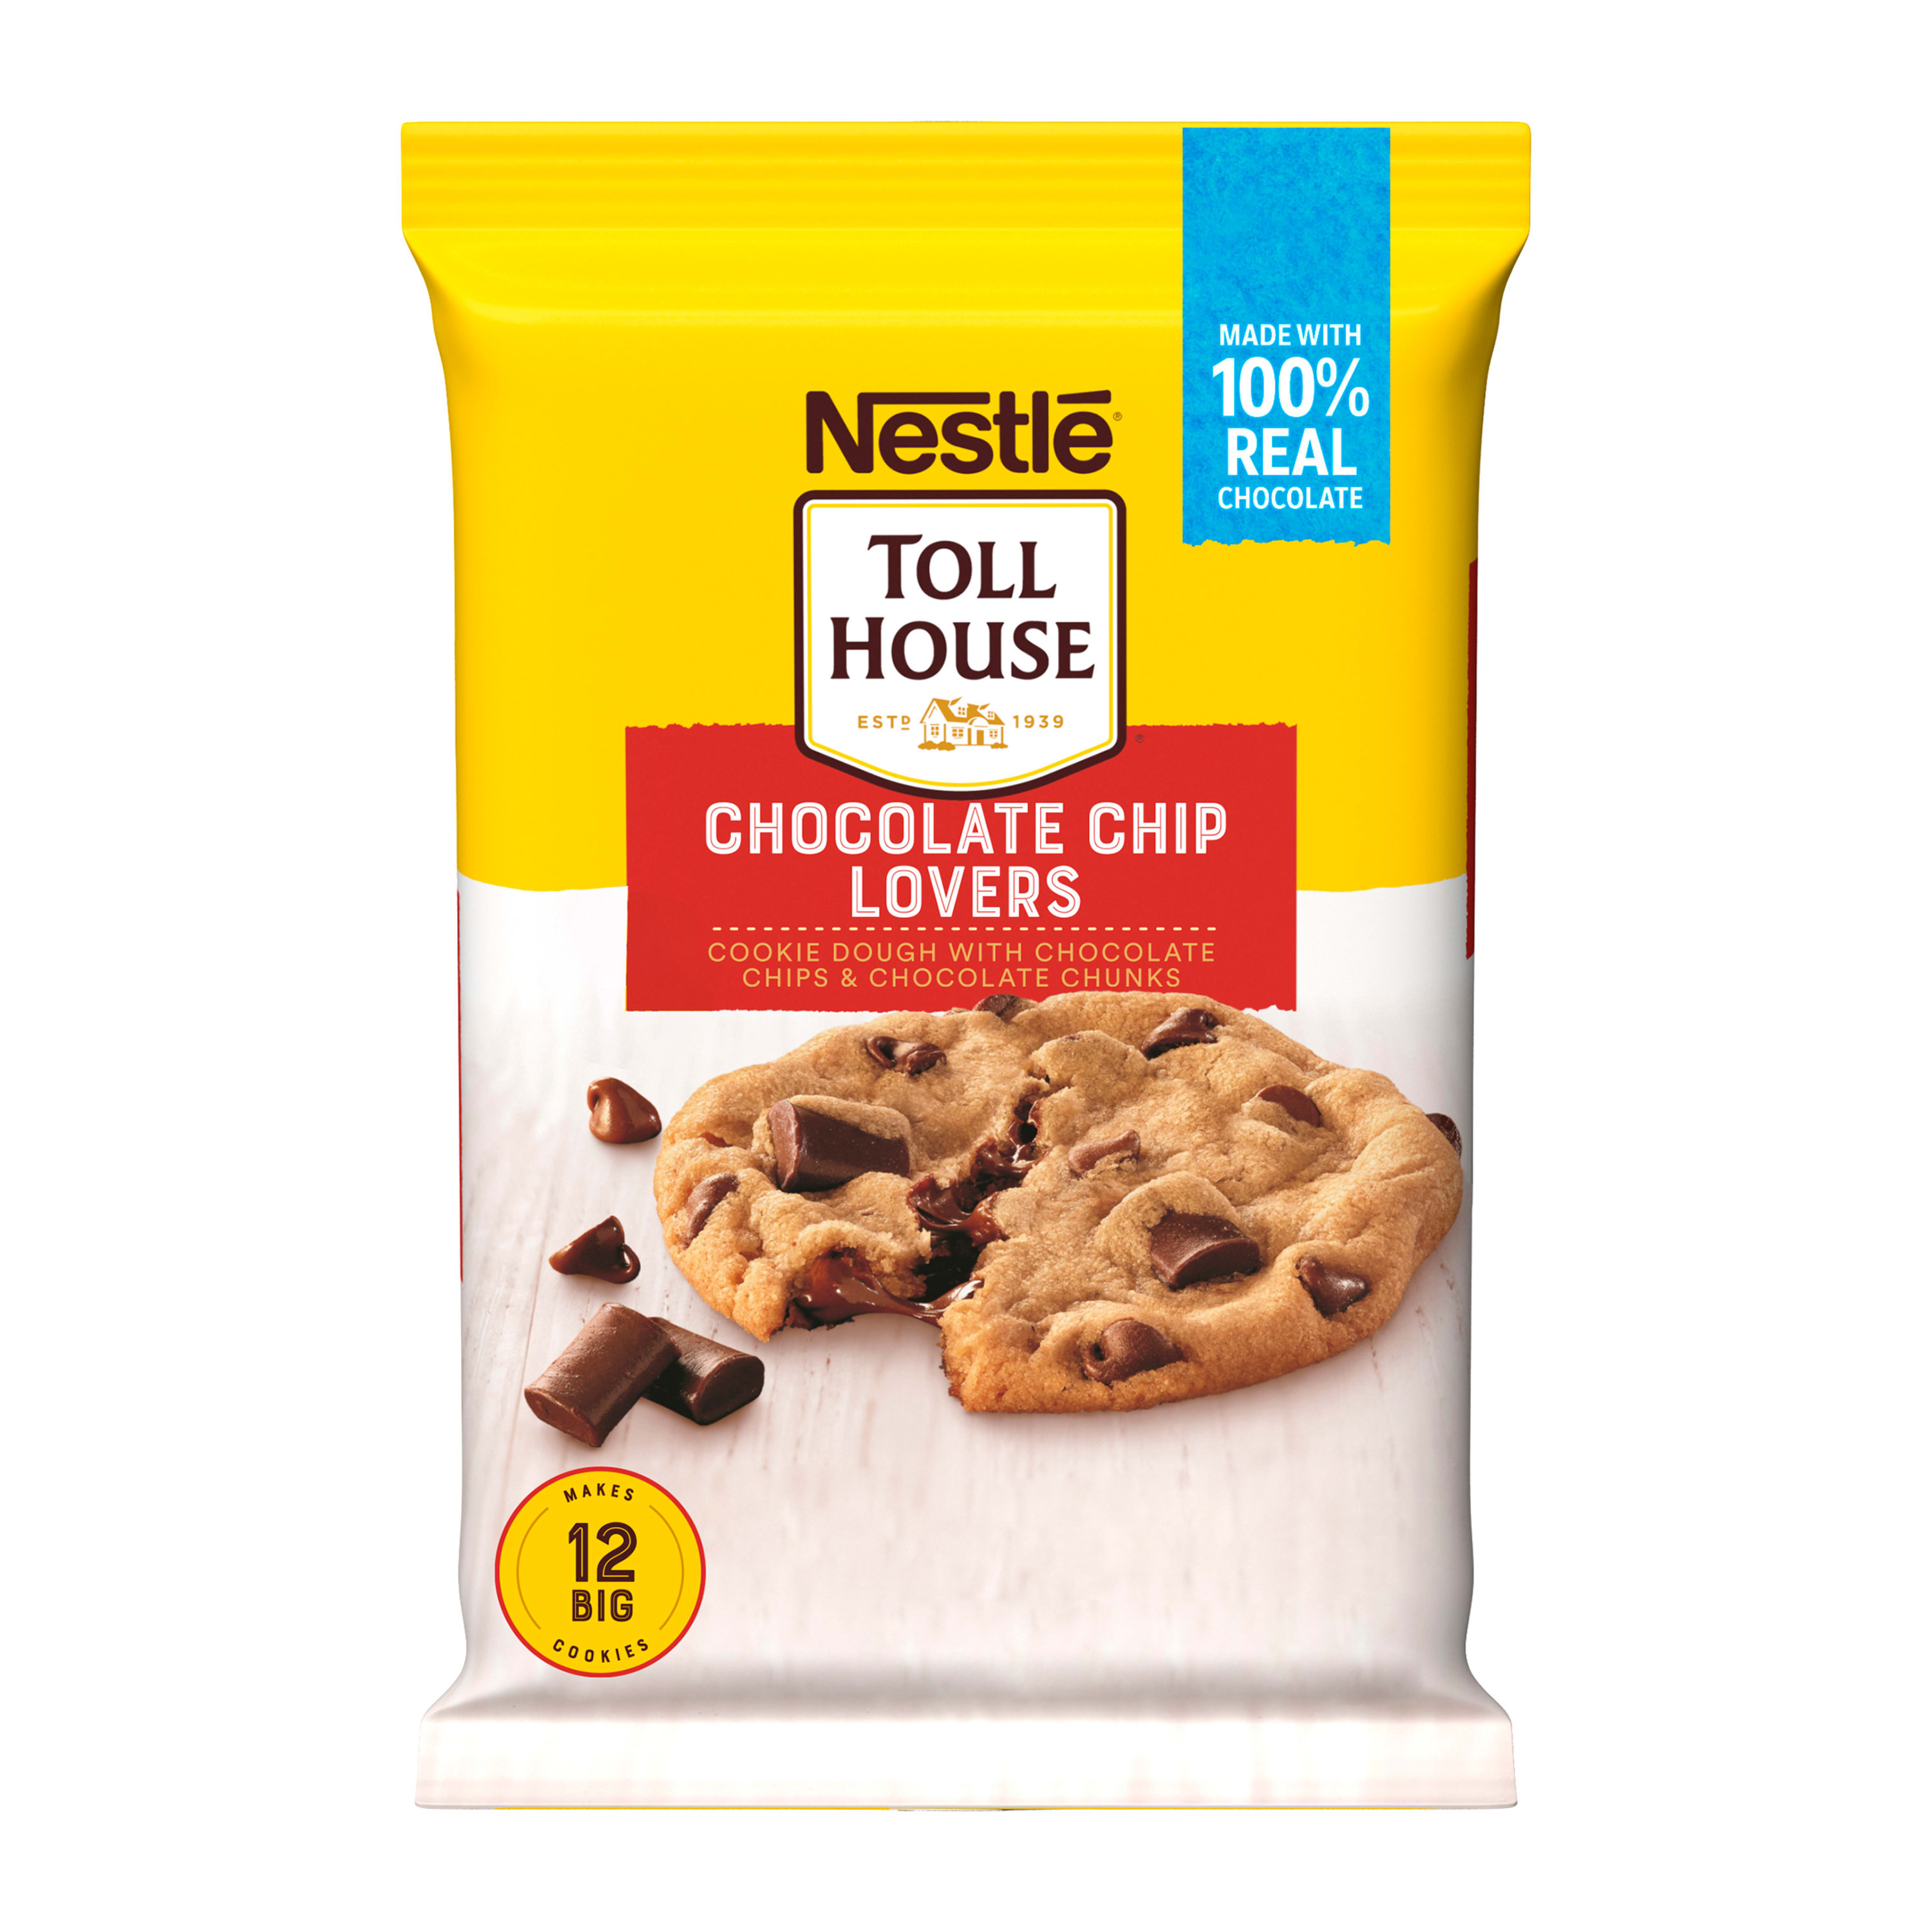 Nestle Toll House Chocolate Chip Lovers Cookie Dough, 16 oz, Makes 12 Giant Cookies - image 2 of 10